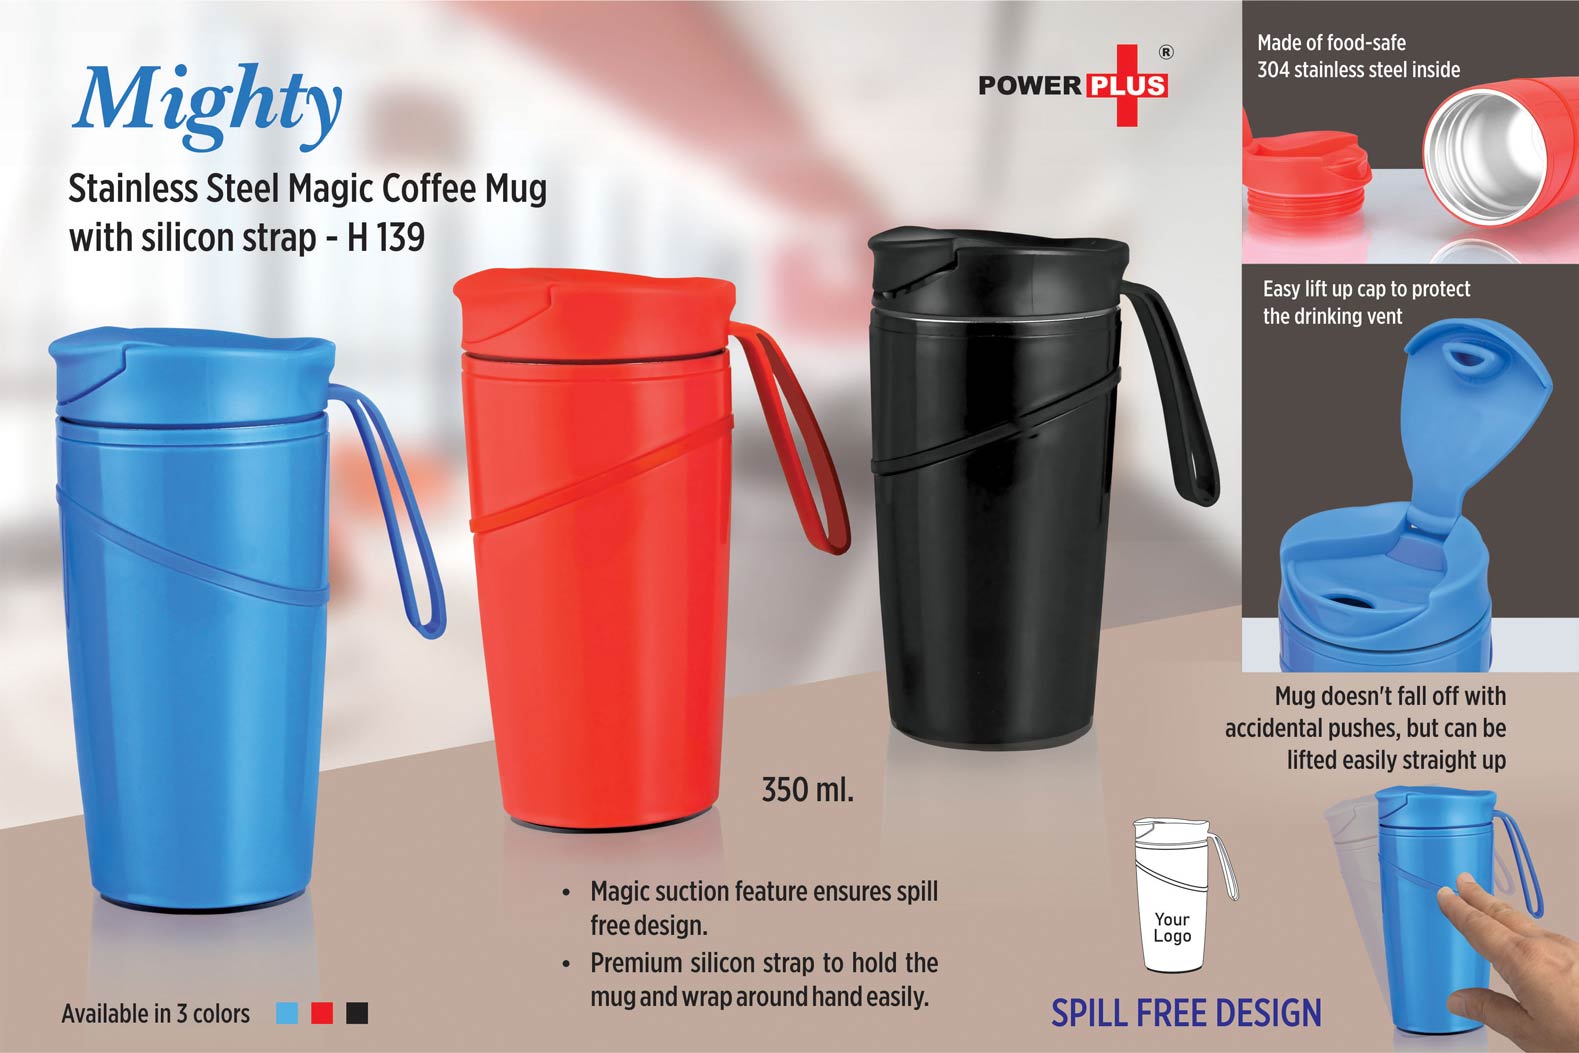 Mighty Stainless Steel Magic Coffee Mug with Silicon Strap 350ml